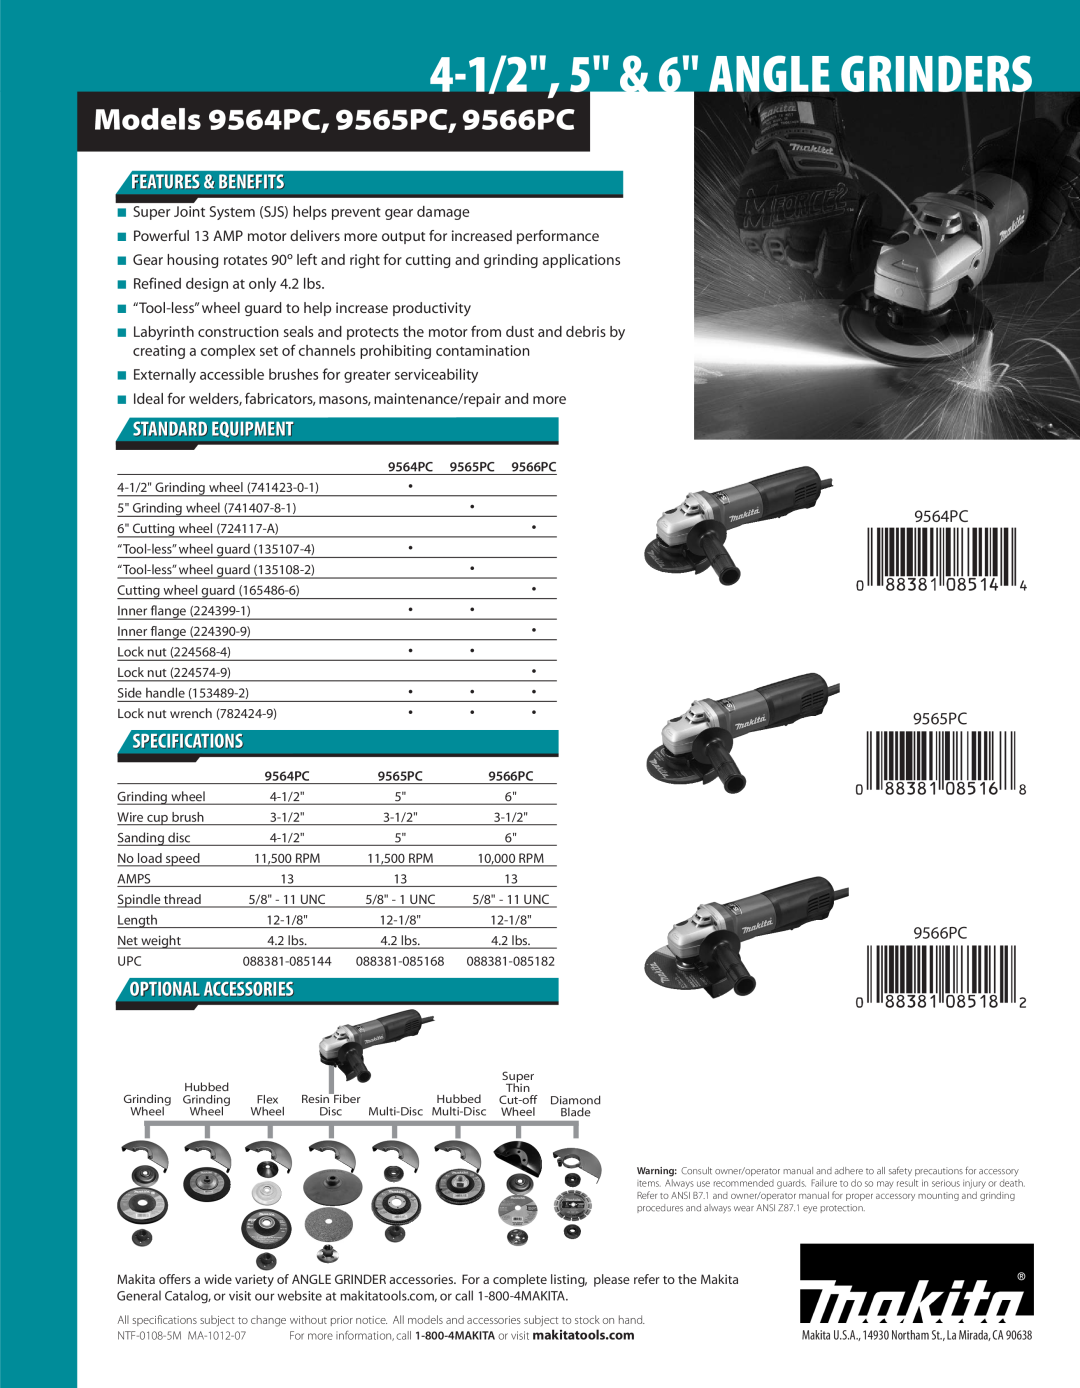 Makita manual Features & Benefits, Standard Equipment, Specifications, Optional Accessories, 9564PC 9565PC 9566PC 